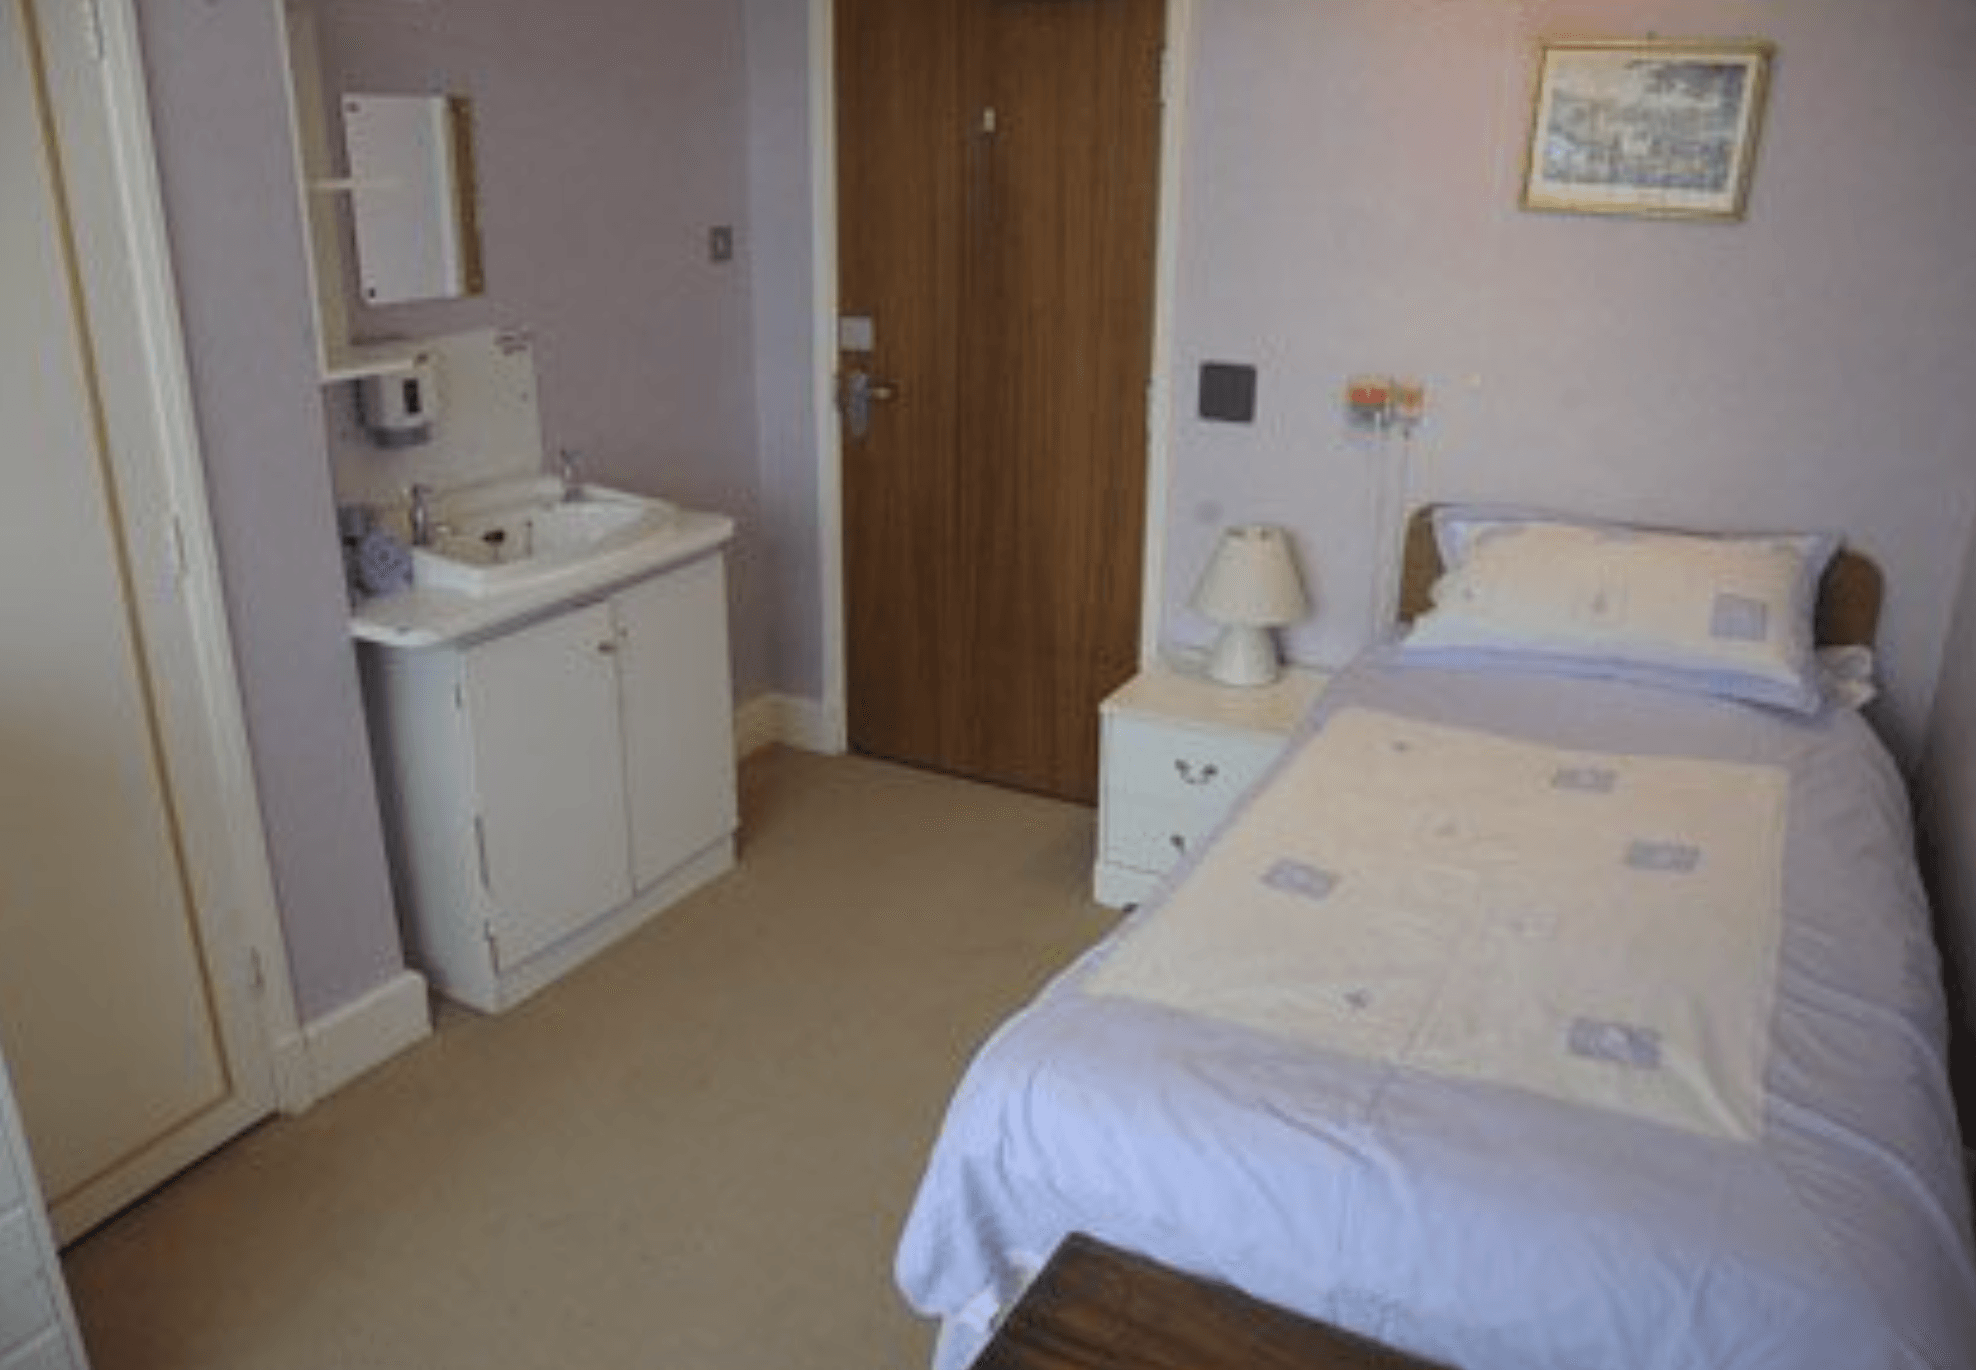 Bedroom of Harvey House care home in Leicester